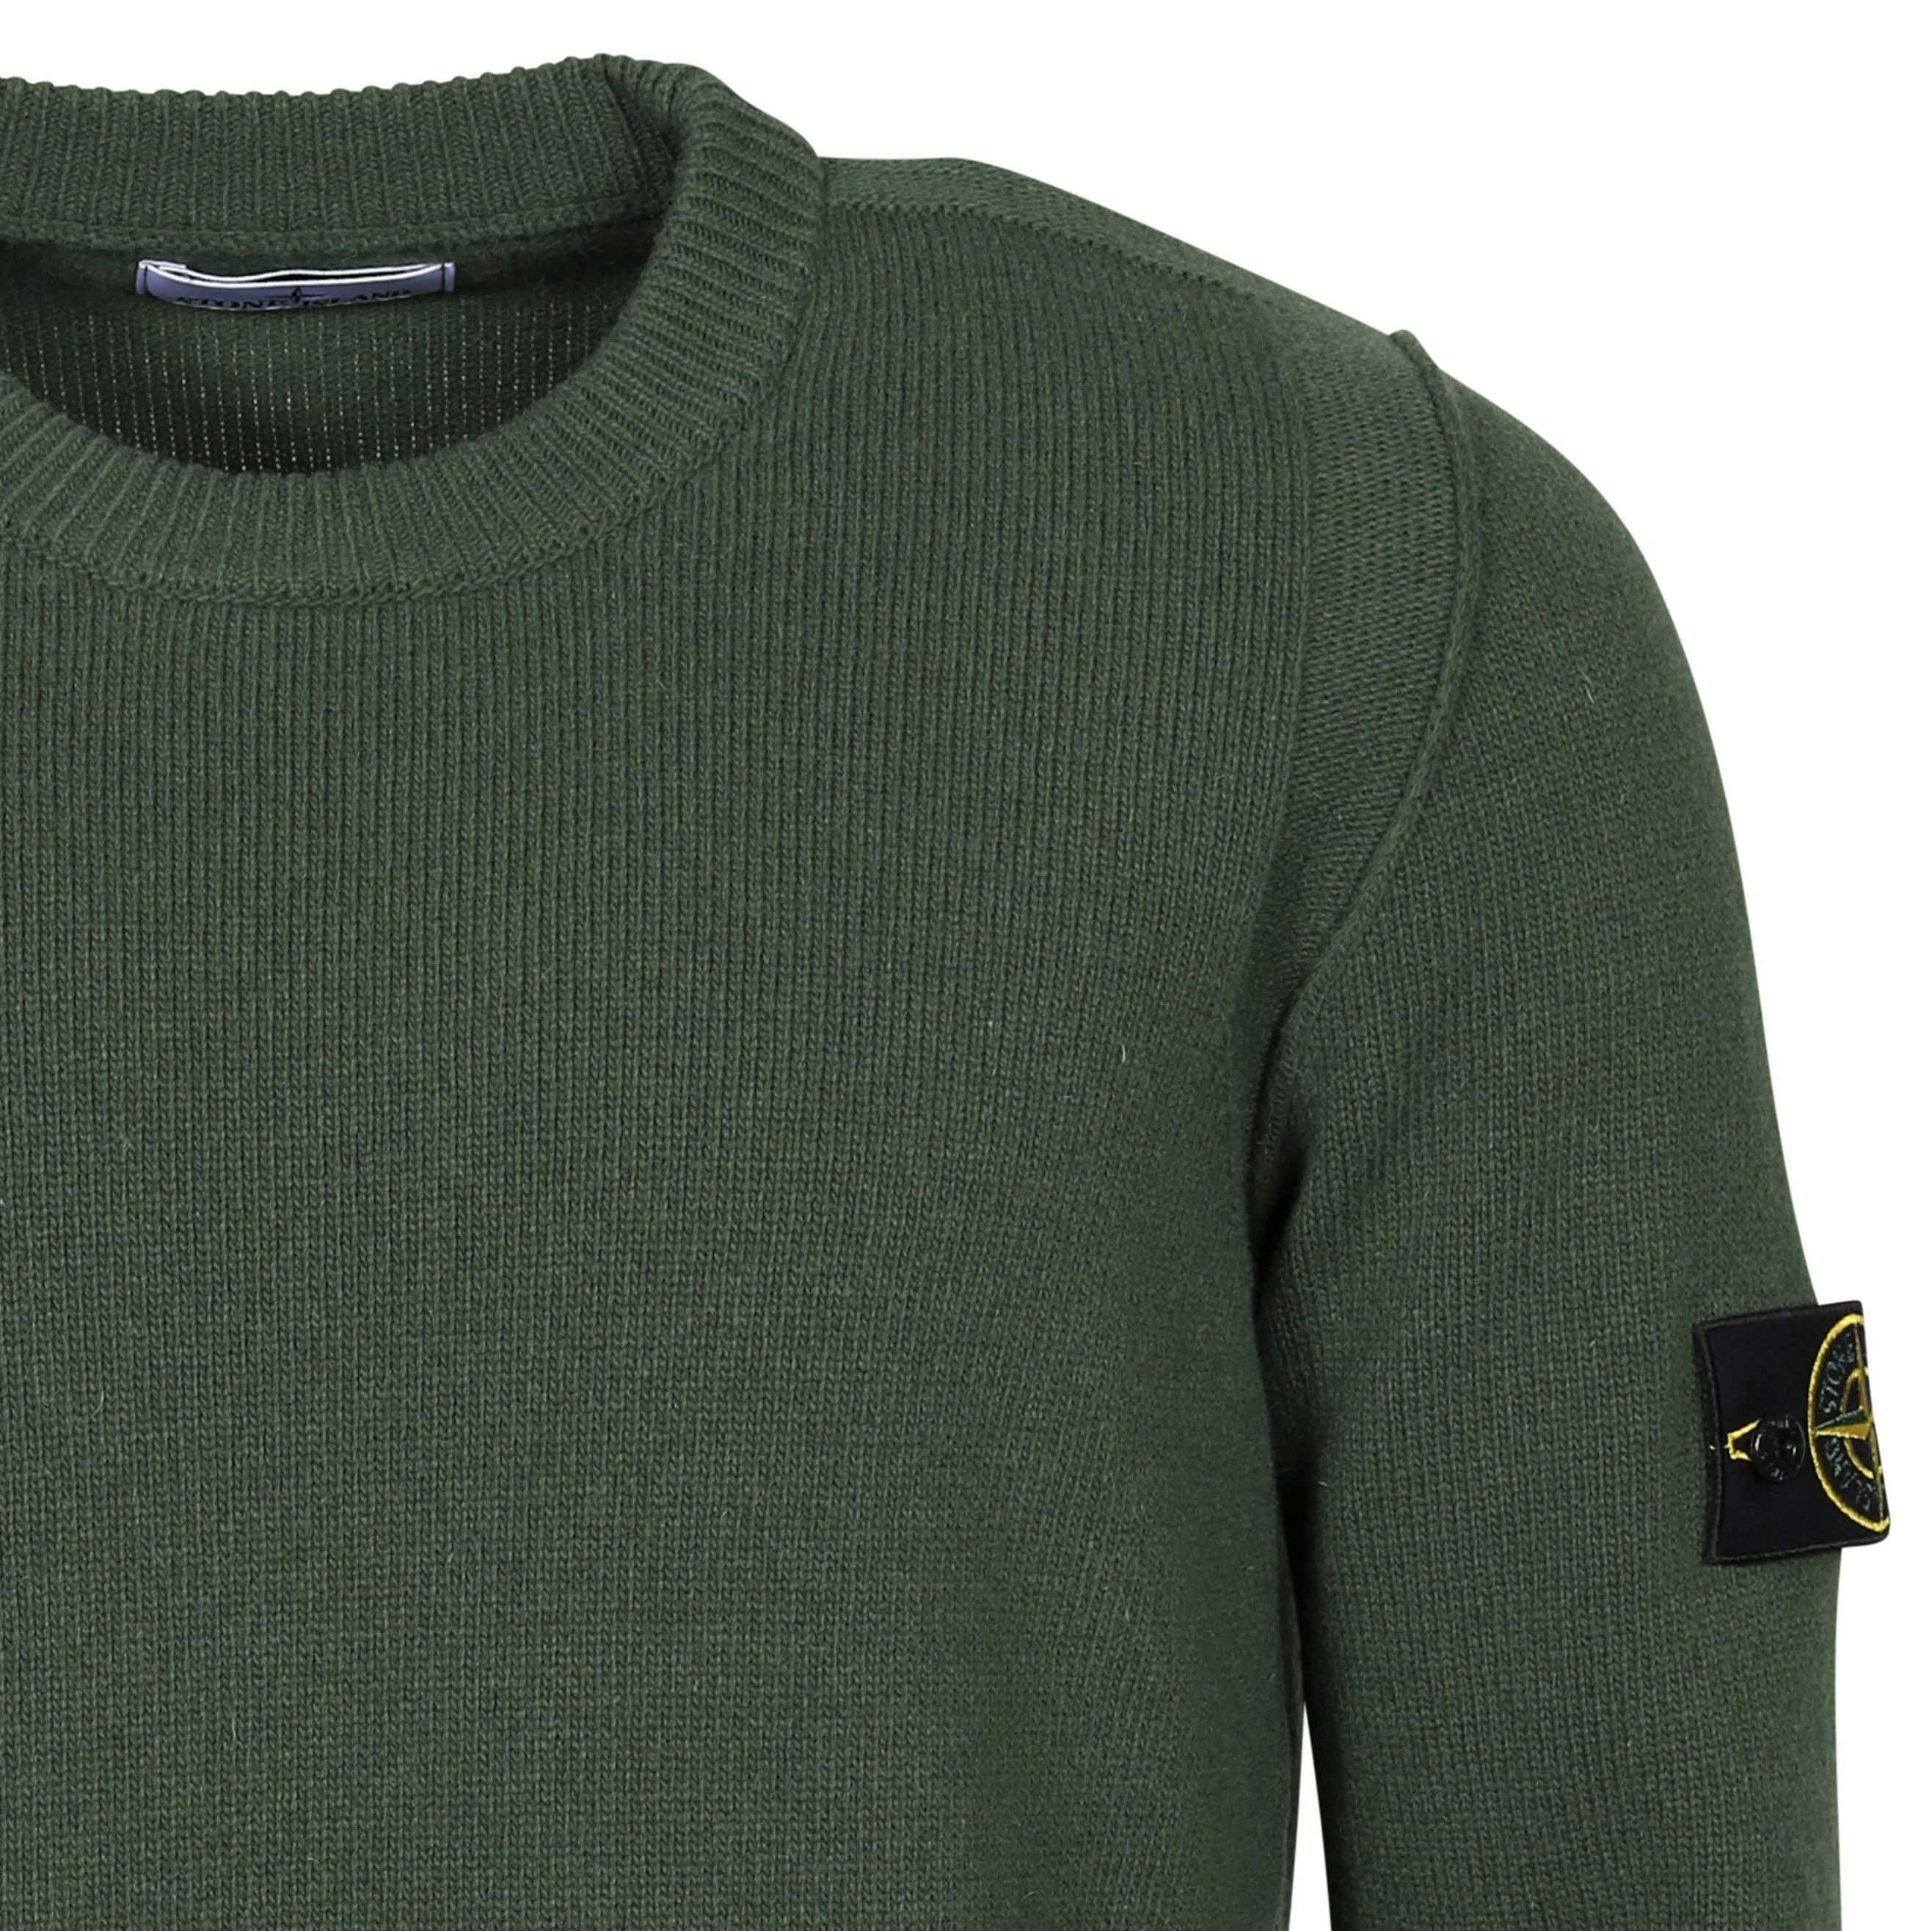 Stone Island Knit Sweater in Olive